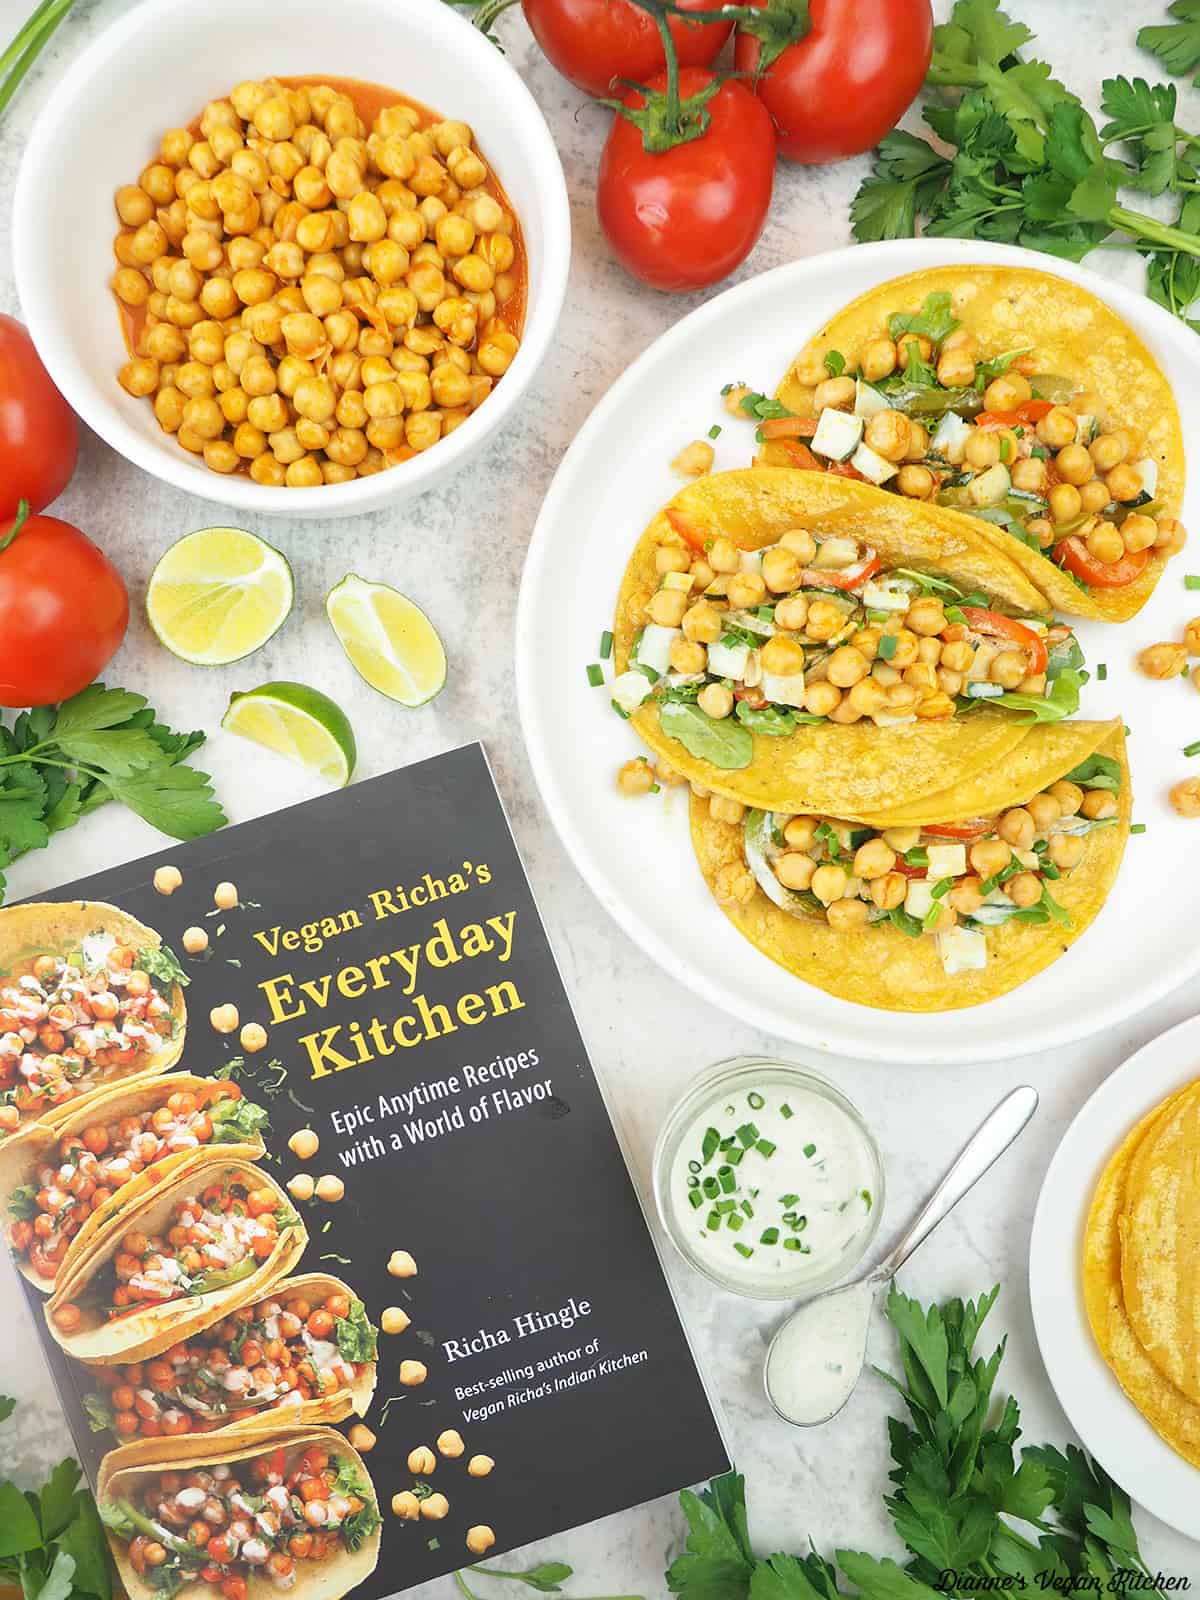 Vegan Richa's Everyday Kitchen with plate of tacos